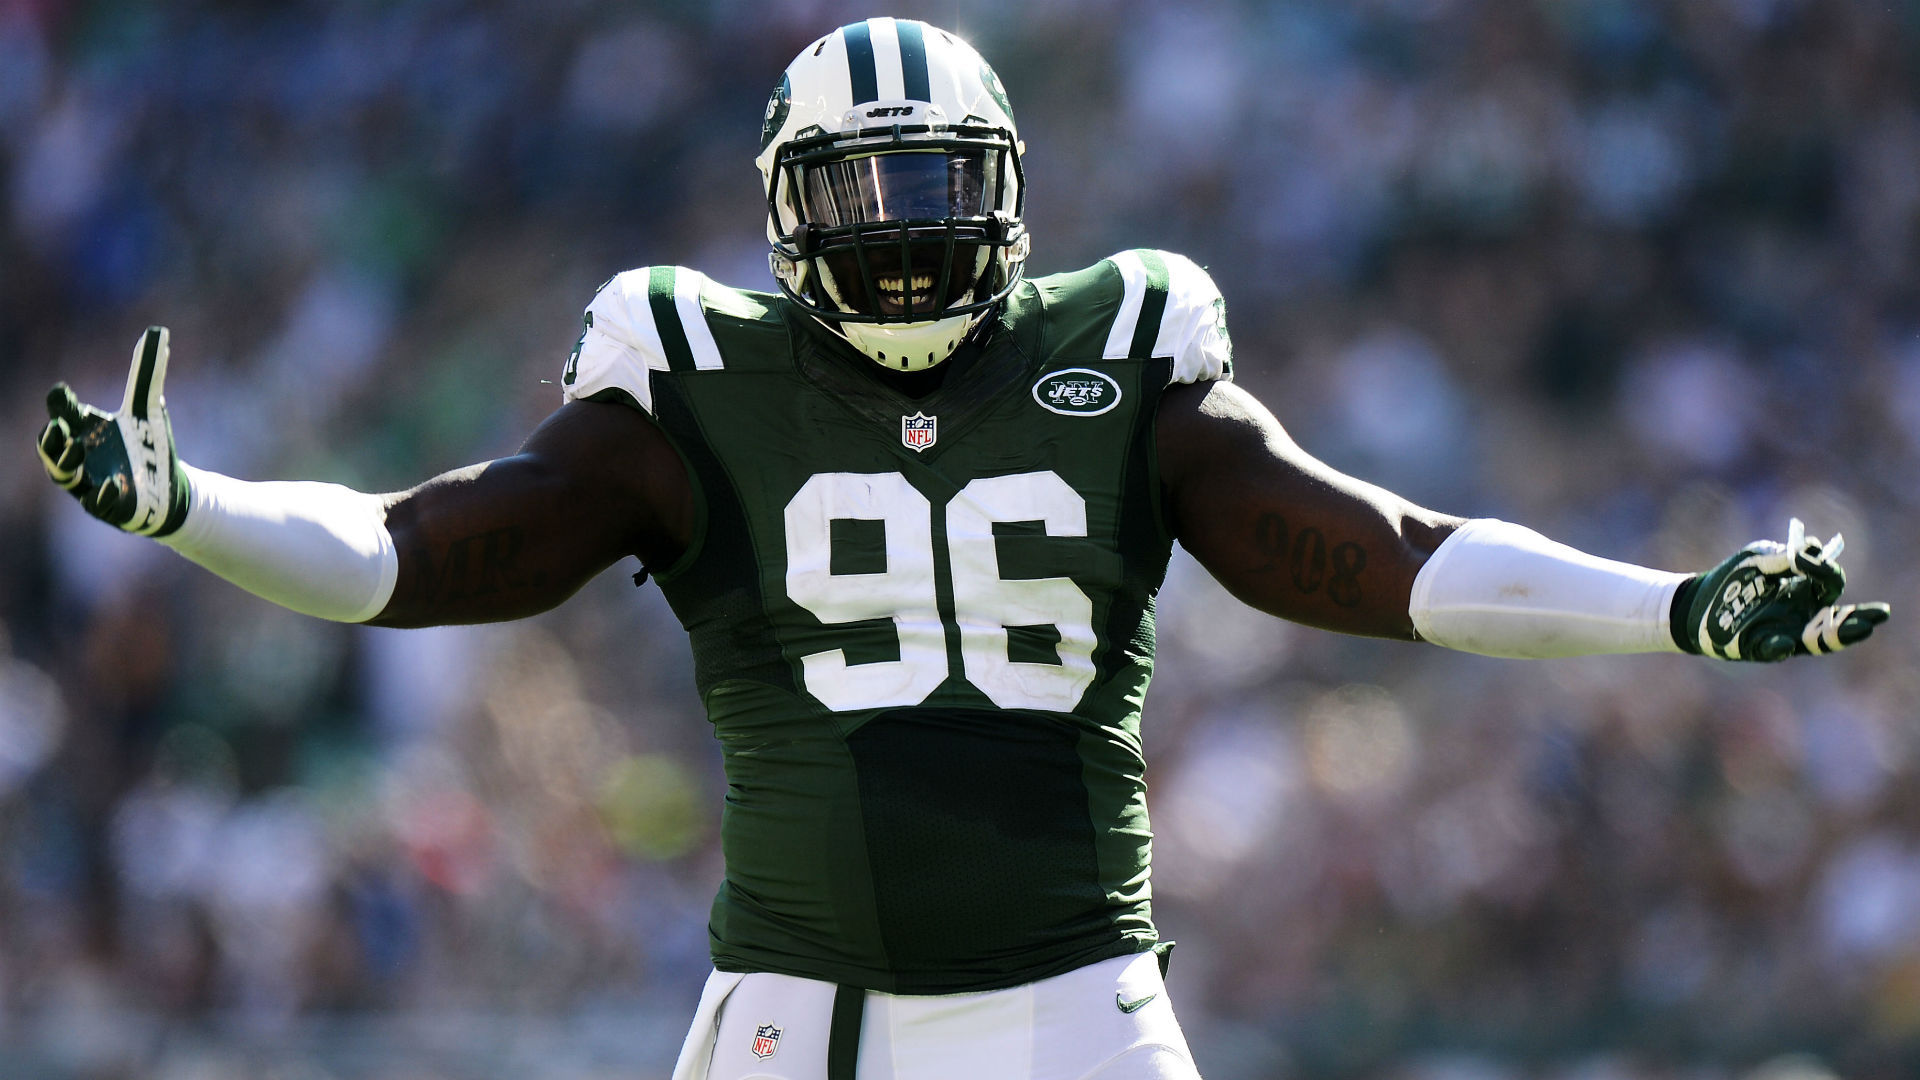 Top free agent Muhammad Wilkerson arrested on DWI charge, report says